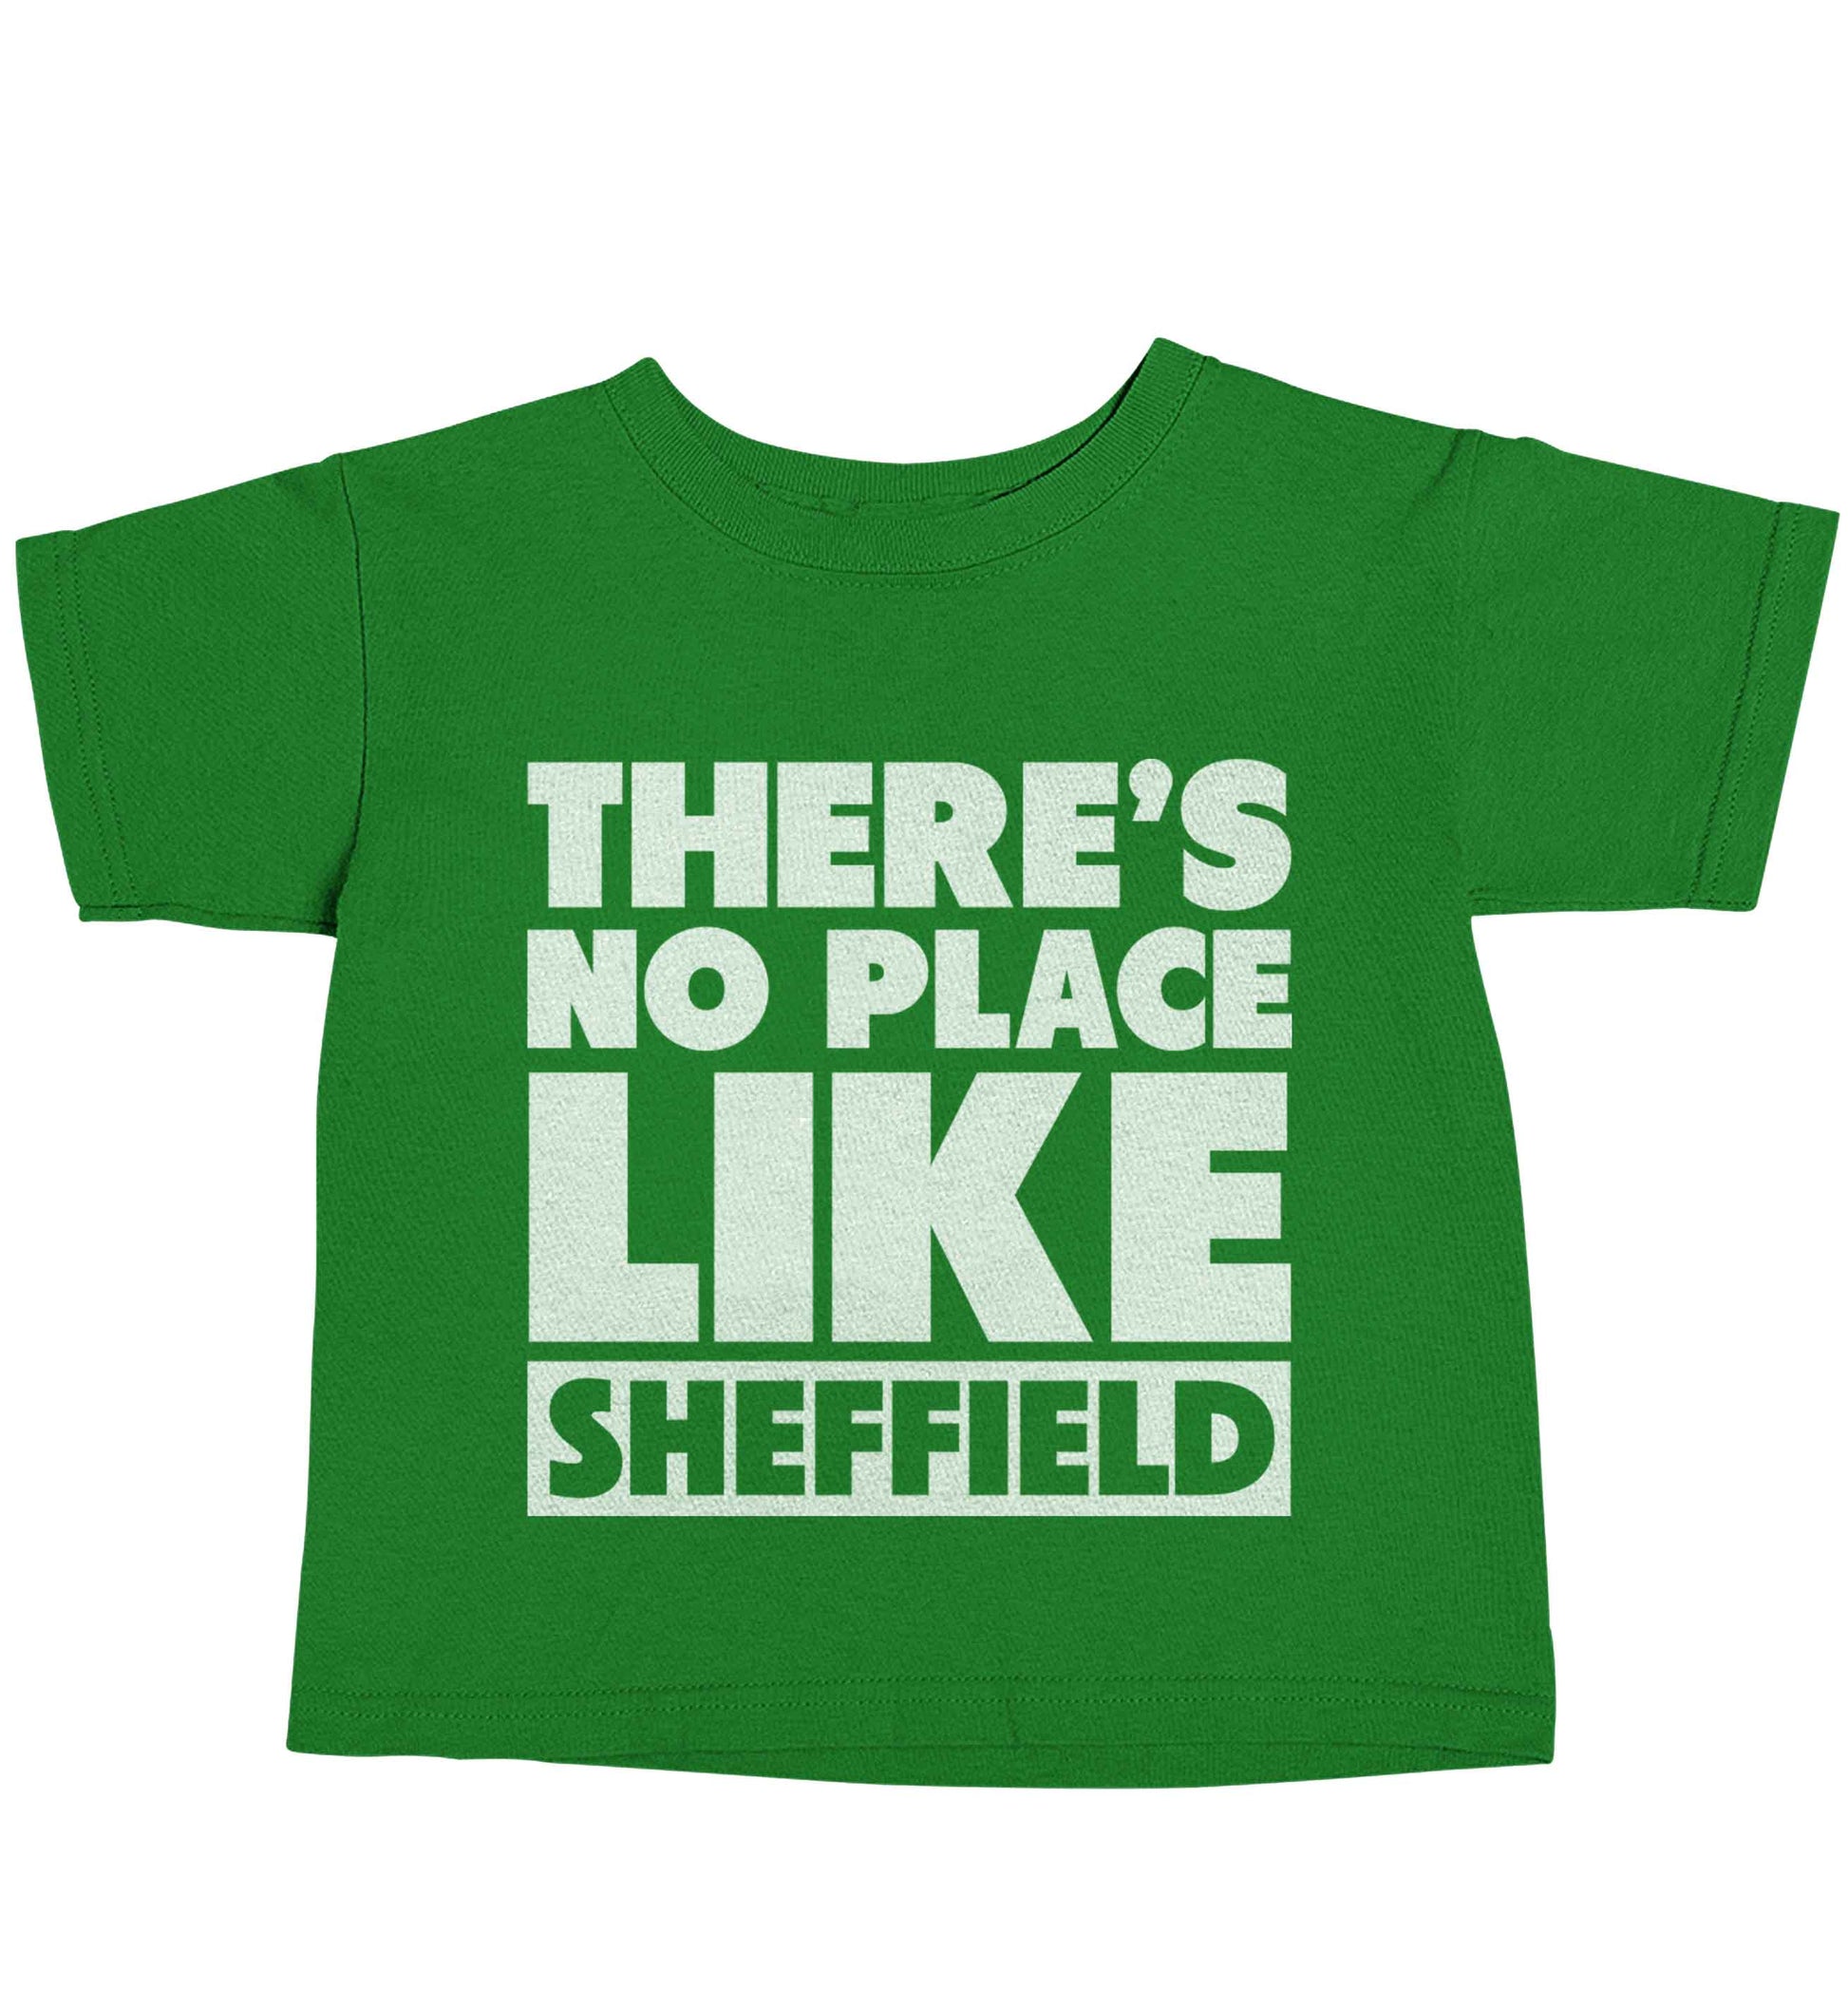 There's no place like Sheffield green baby toddler Tshirt 2 Years